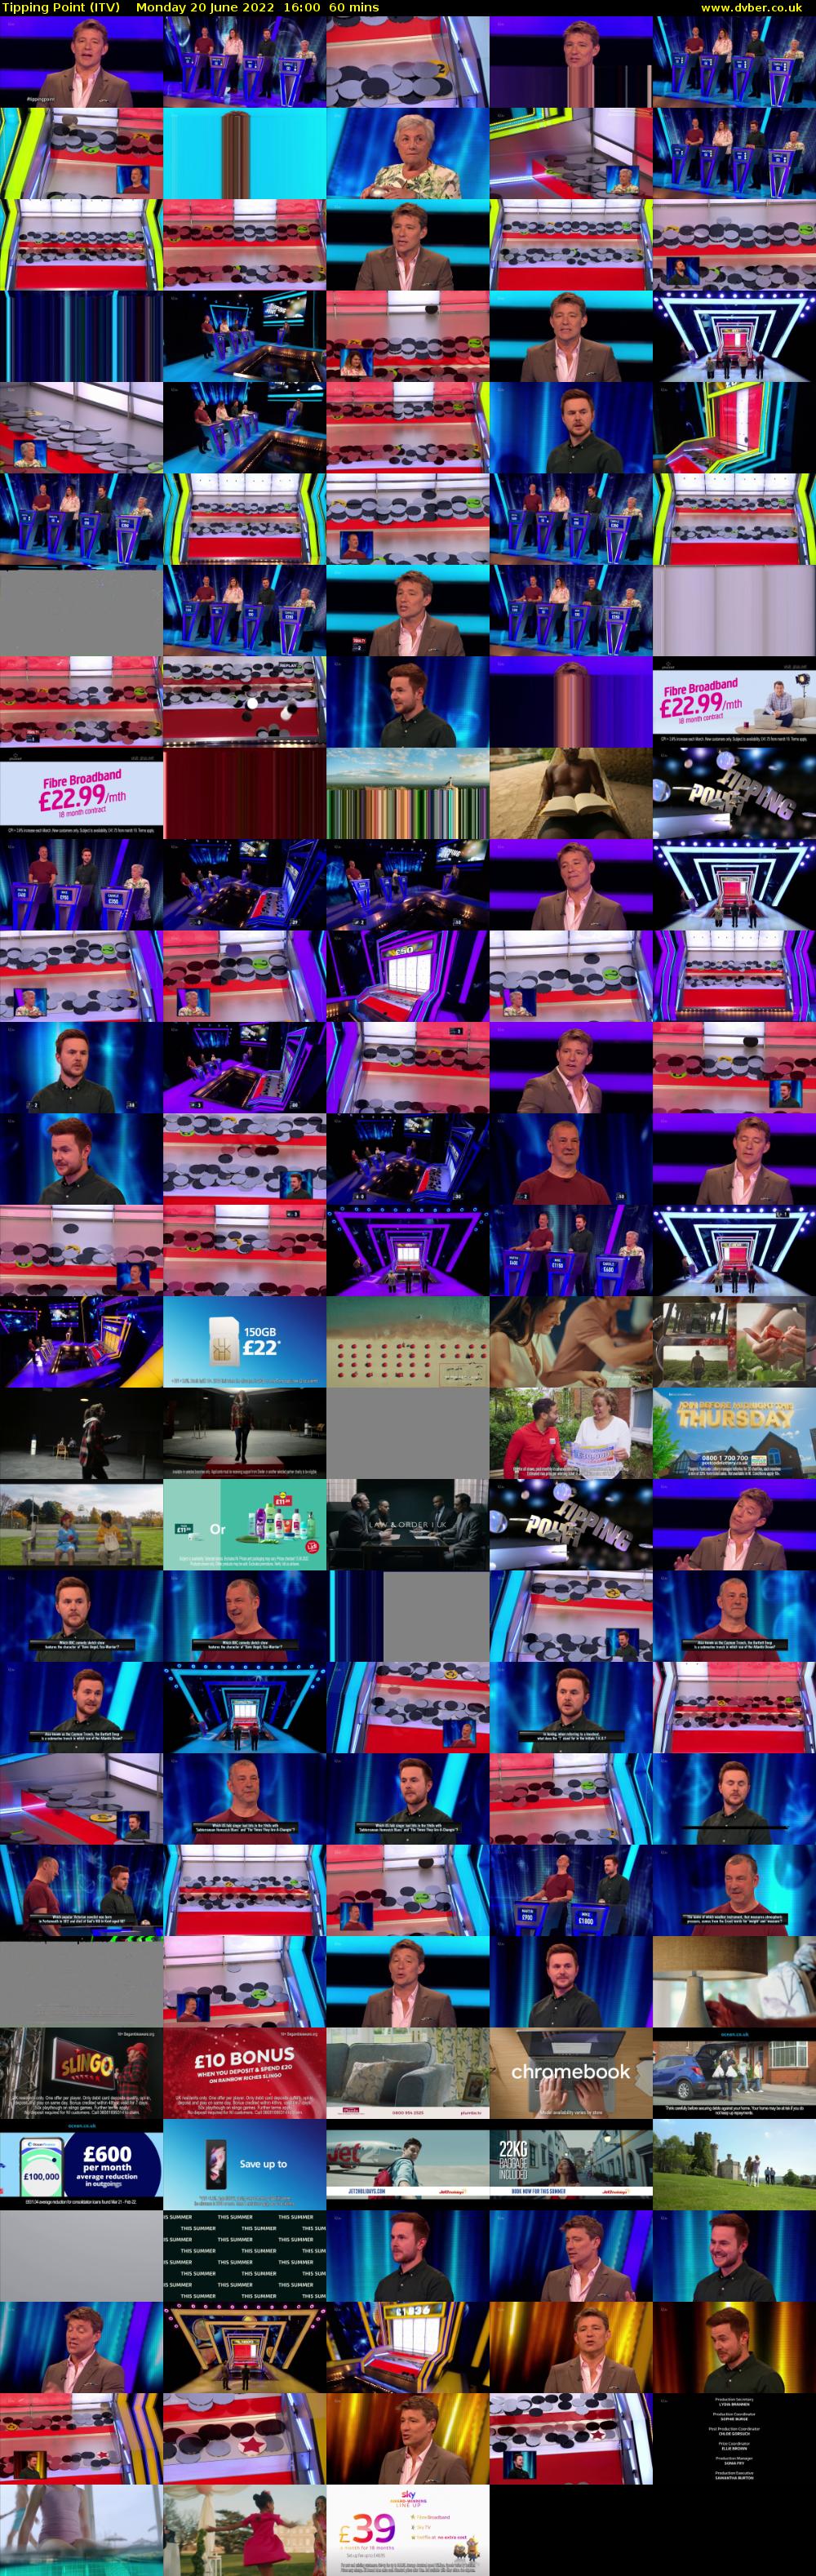 Tipping Point (ITV) Monday 20 June 2022 16:00 - 17:00